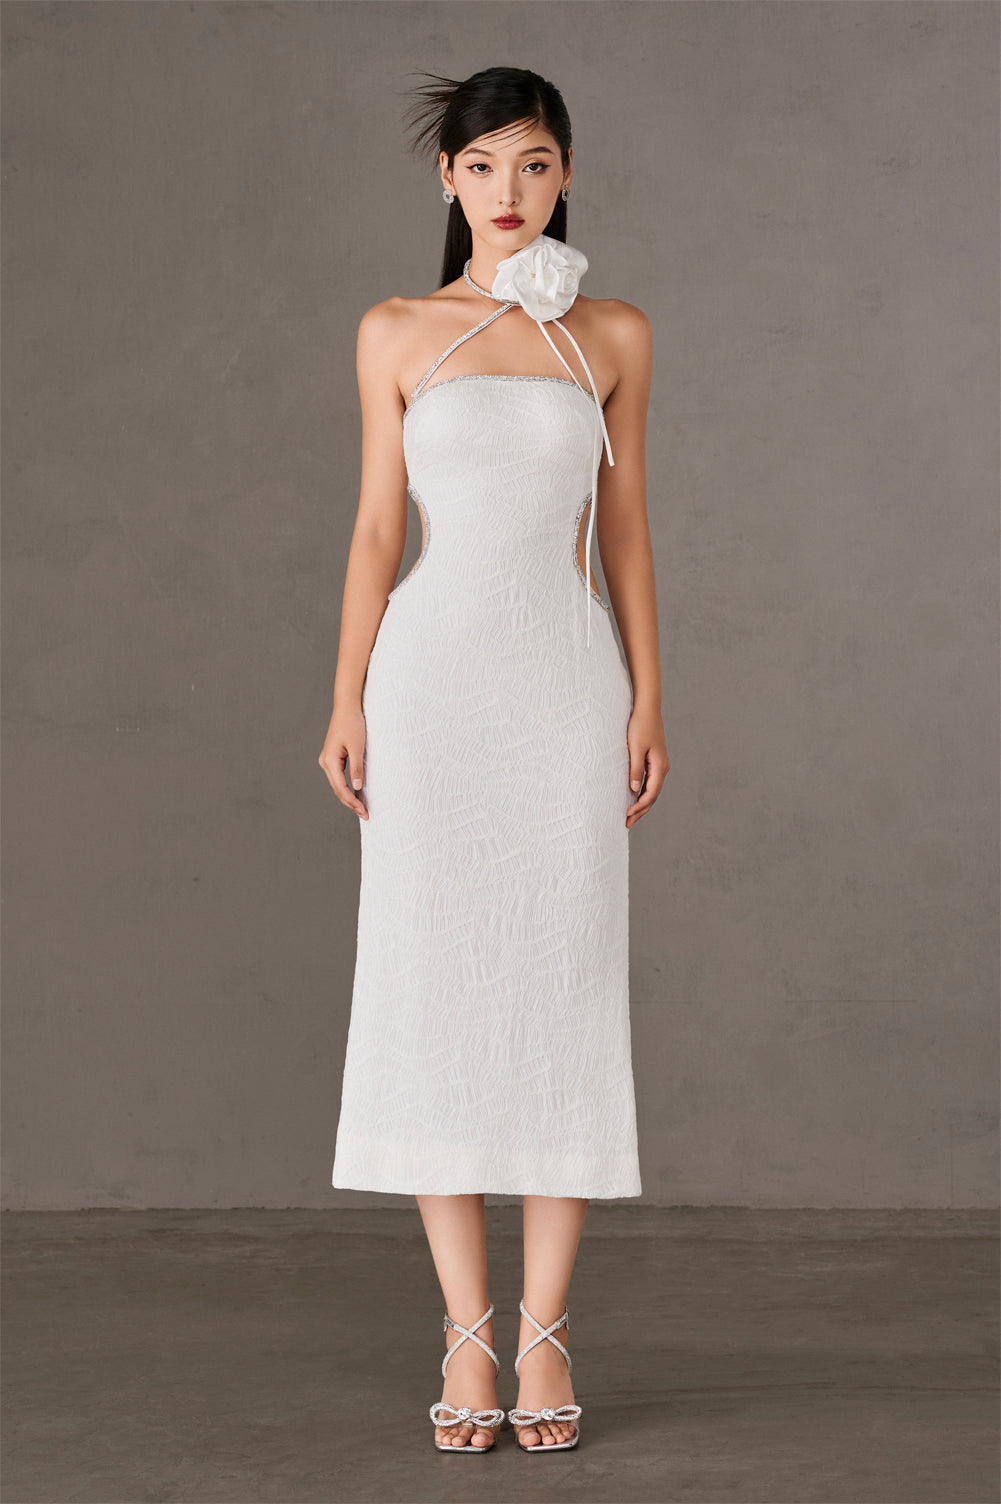 Midi Dress With Waist Cut-Out And Tie-Up Strings